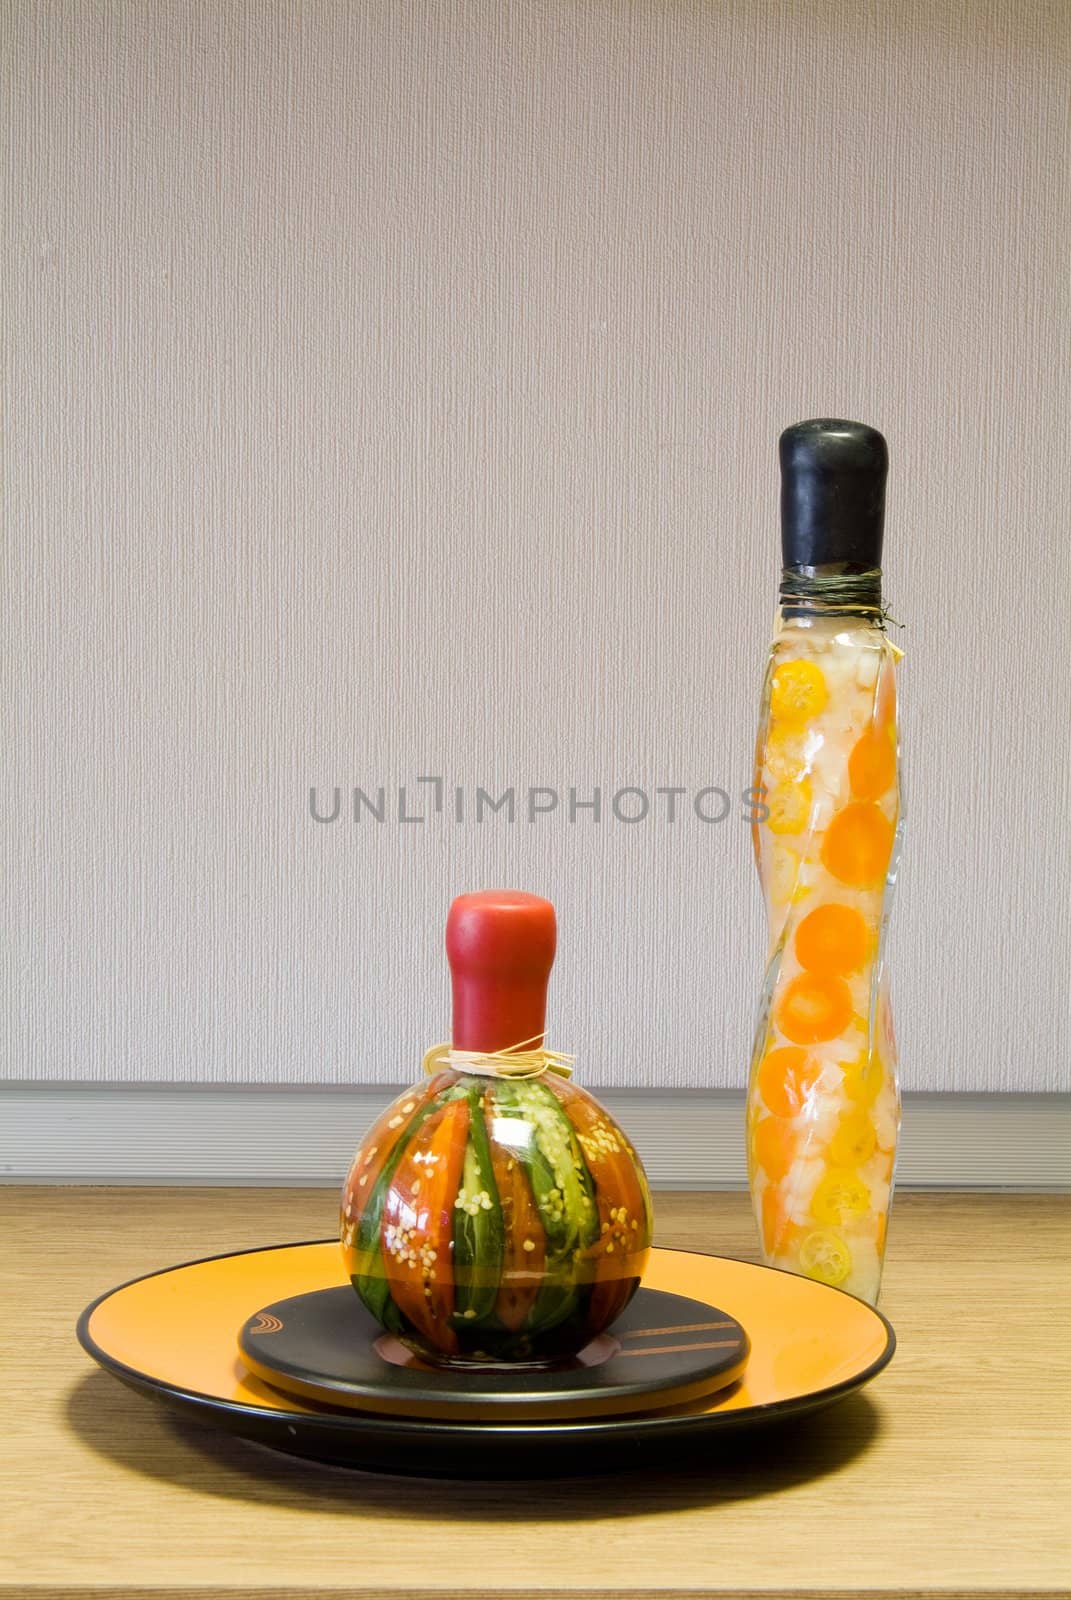 Decorative bottles and the ceramic plate on the table